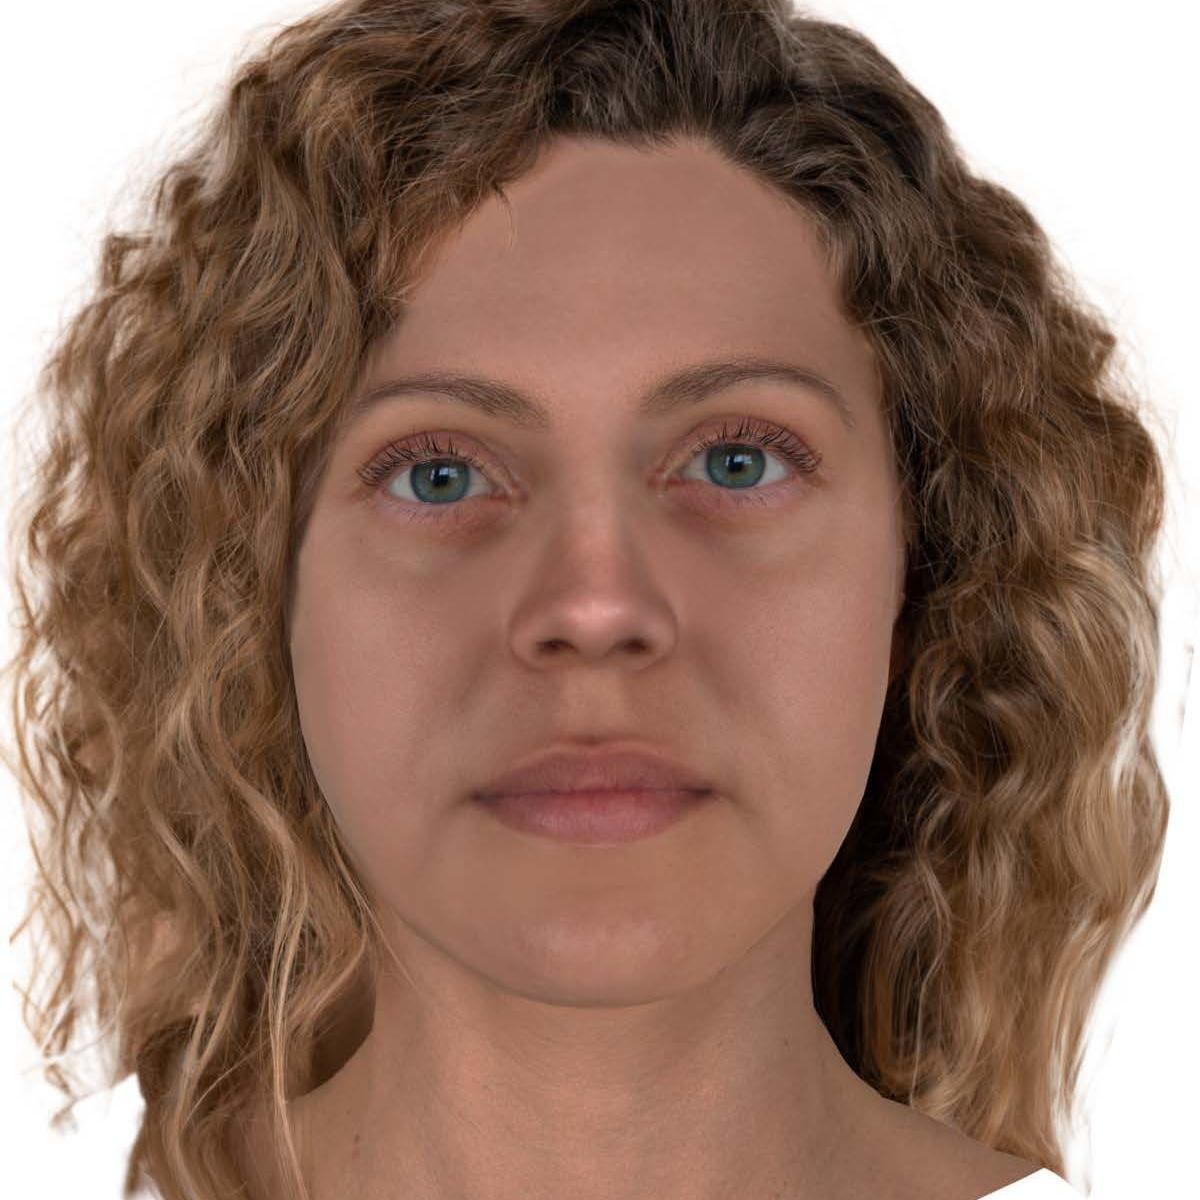 [IMAGE] New composite released to ID remains found in Sweet Home